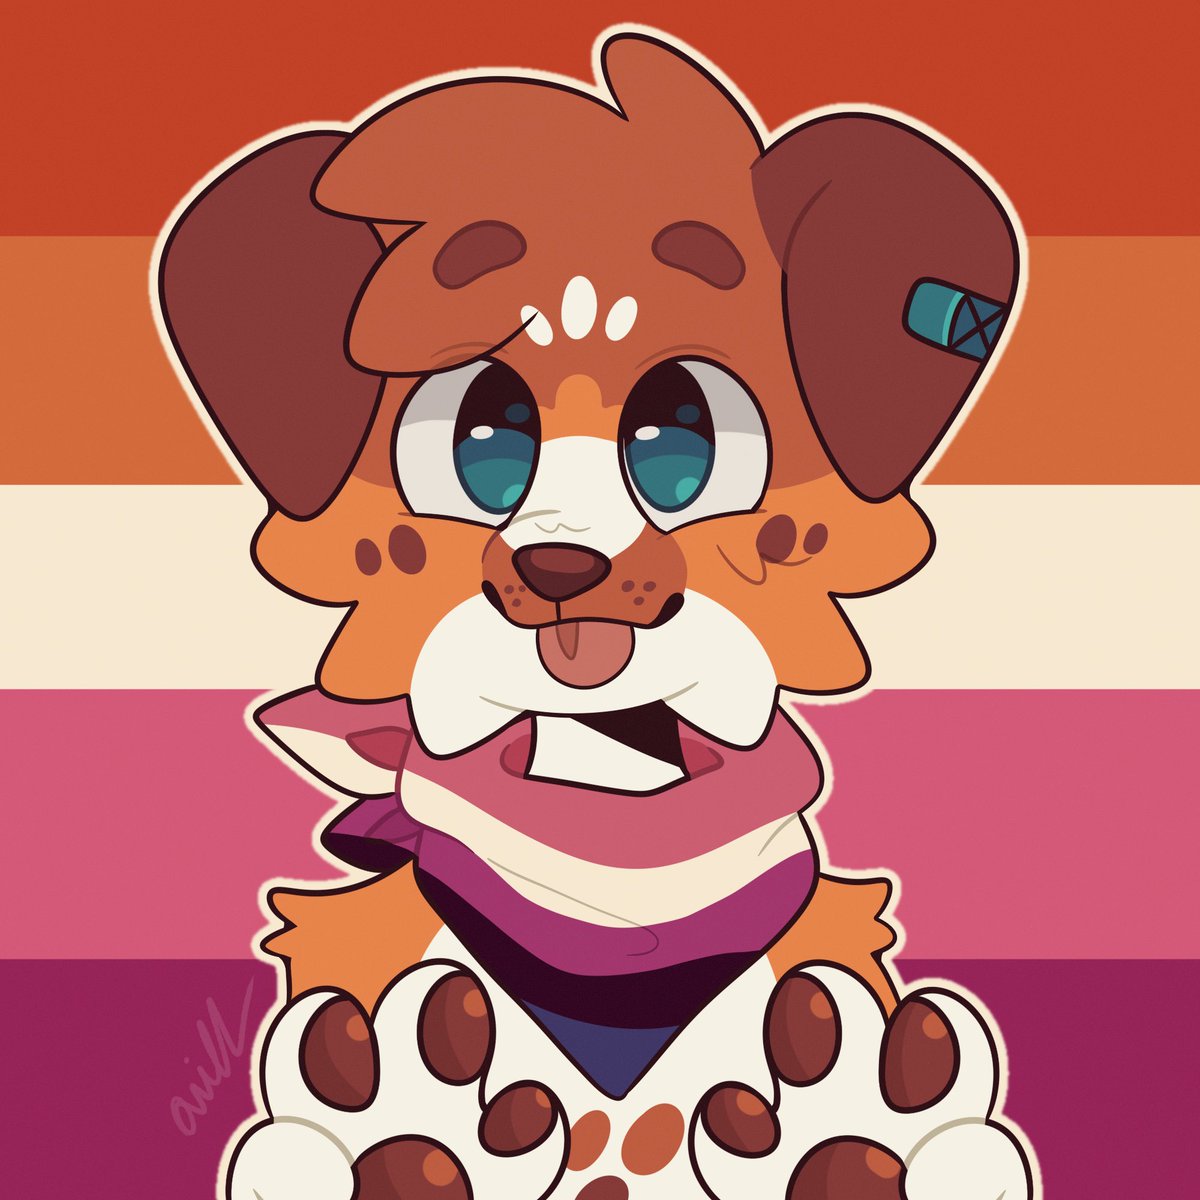 PRIDE YCH 🏳️‍🌈

for a chance to win a free pride icon (any animal species!):
- follow me!
- like this post!
- retweet!

comment below a character ref and what flags you want for the bg and bandana! 

ends on june 1st!! (just in time for pride month)